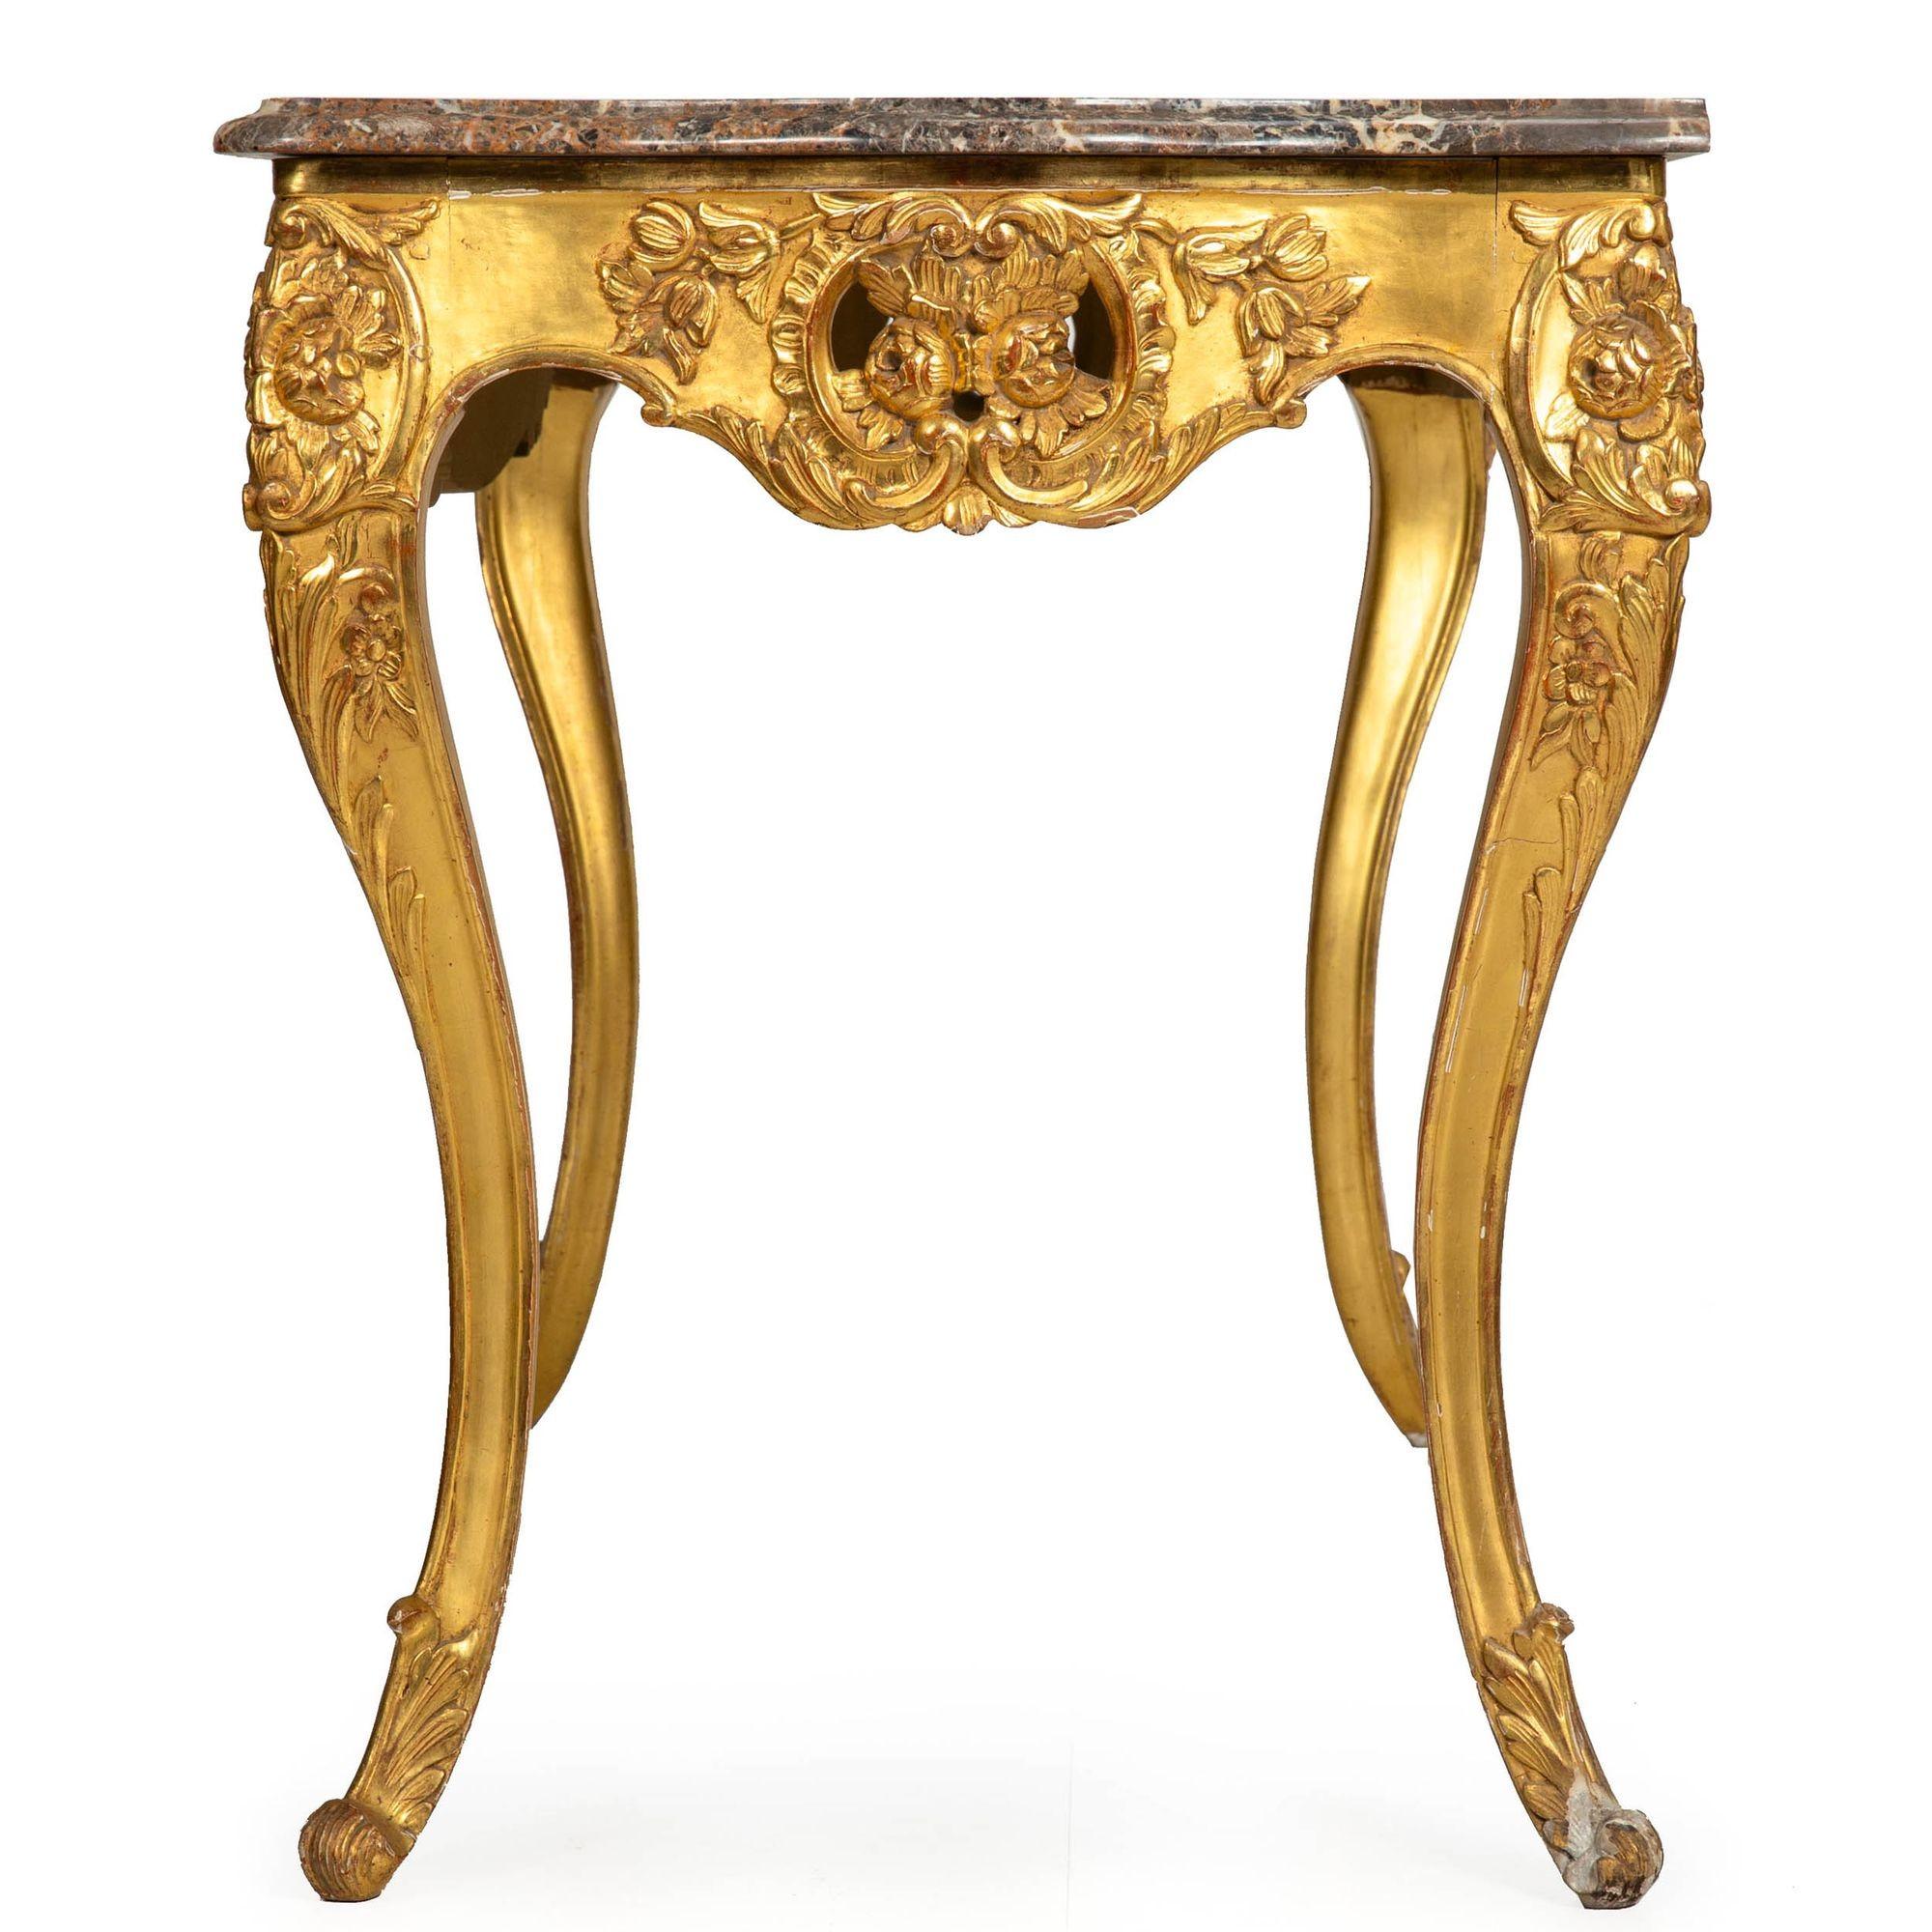 French Louis XV Style Gilded Marble Top Antique Console Pier Table In Good Condition For Sale In Shippensburg, PA